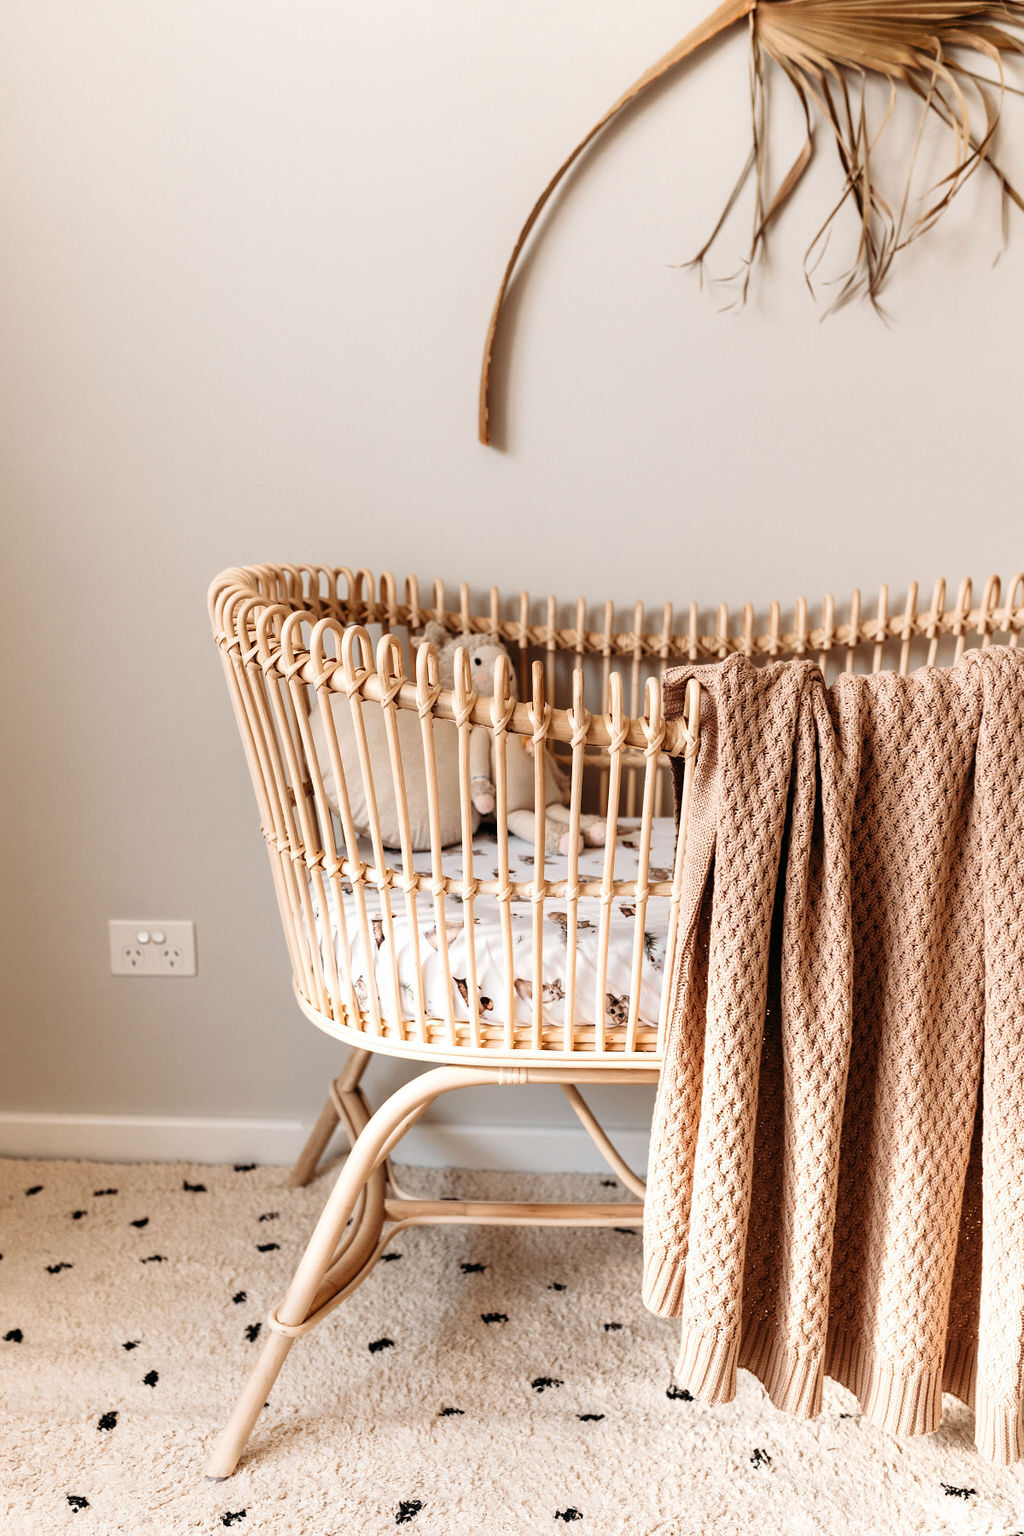 Hazelnut diamond knit baby blanket from Snuggle Hunny Kids is now available on Sugarbird Kids